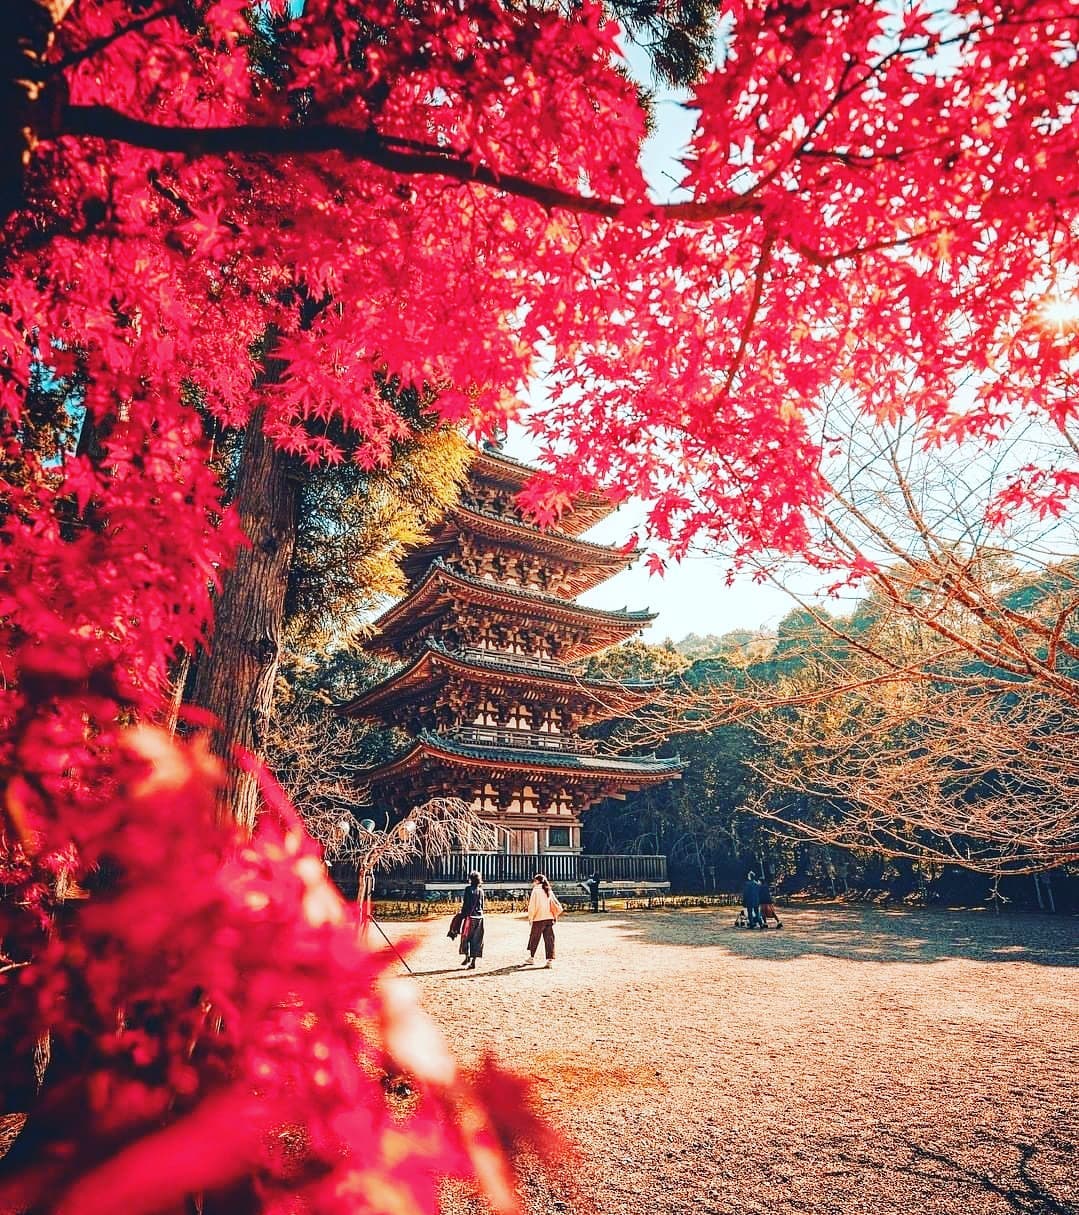 .
Daigoji Temple in Kyoto.
In all its' Autumn glory. 
.
Cannot wait for our visit in November 2022.
It will be just as stunning...
.
#maijourneys #japan2022 #lovejapan #kyoto #traveljapan #womenonlytravel #boutiquetraveljapan #boutiquetravelforwomen #womenwholovetotravel #womenonlytours #bywomenforwomen #japanlove